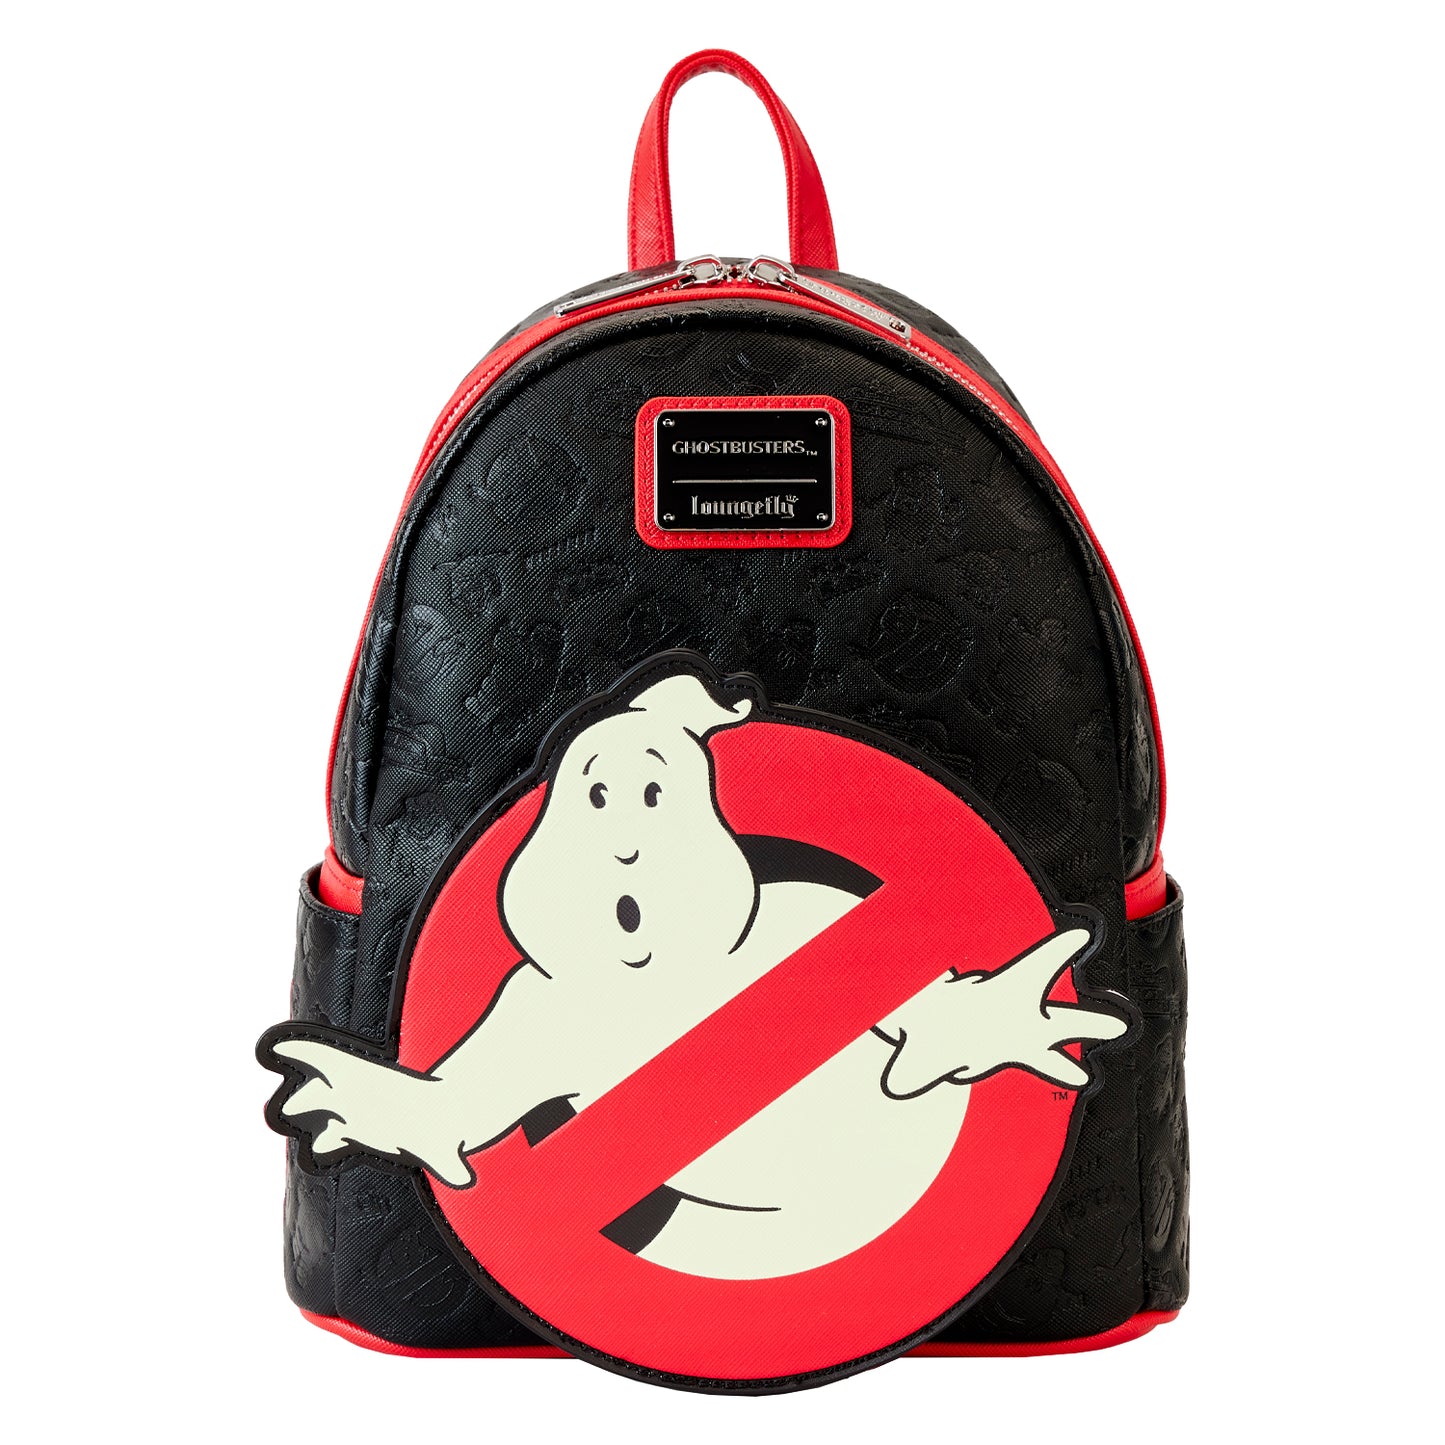 Loungefly Ghostbusters No Ghost Logo Mini Backpack *PRE-ORDER ITEM*